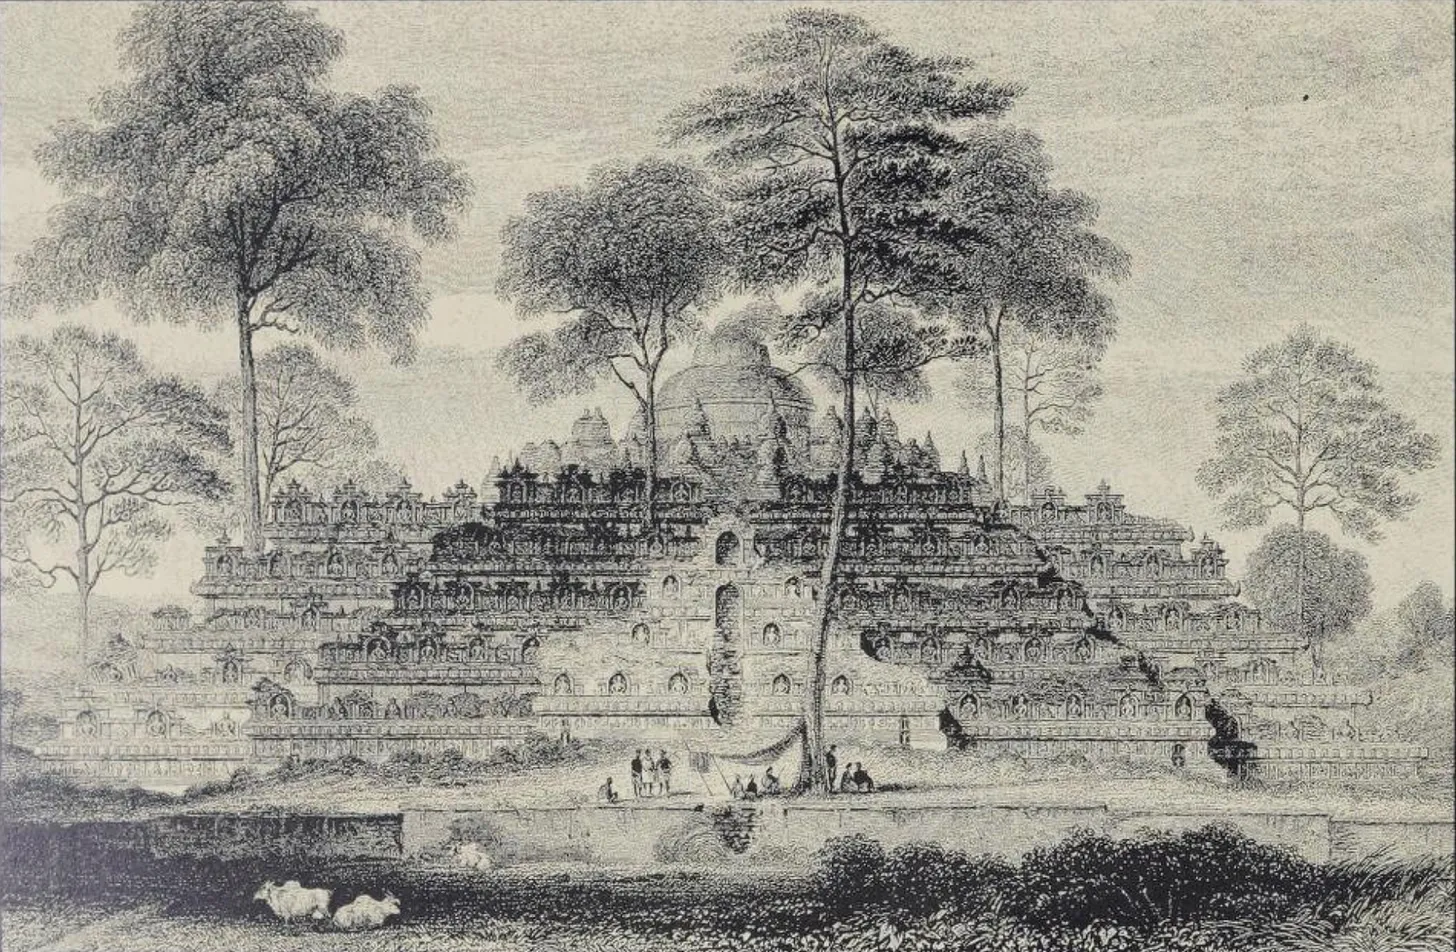 An engraving of Borobudur based on original drawings — Unknown (c. 19th century). Public Domain.